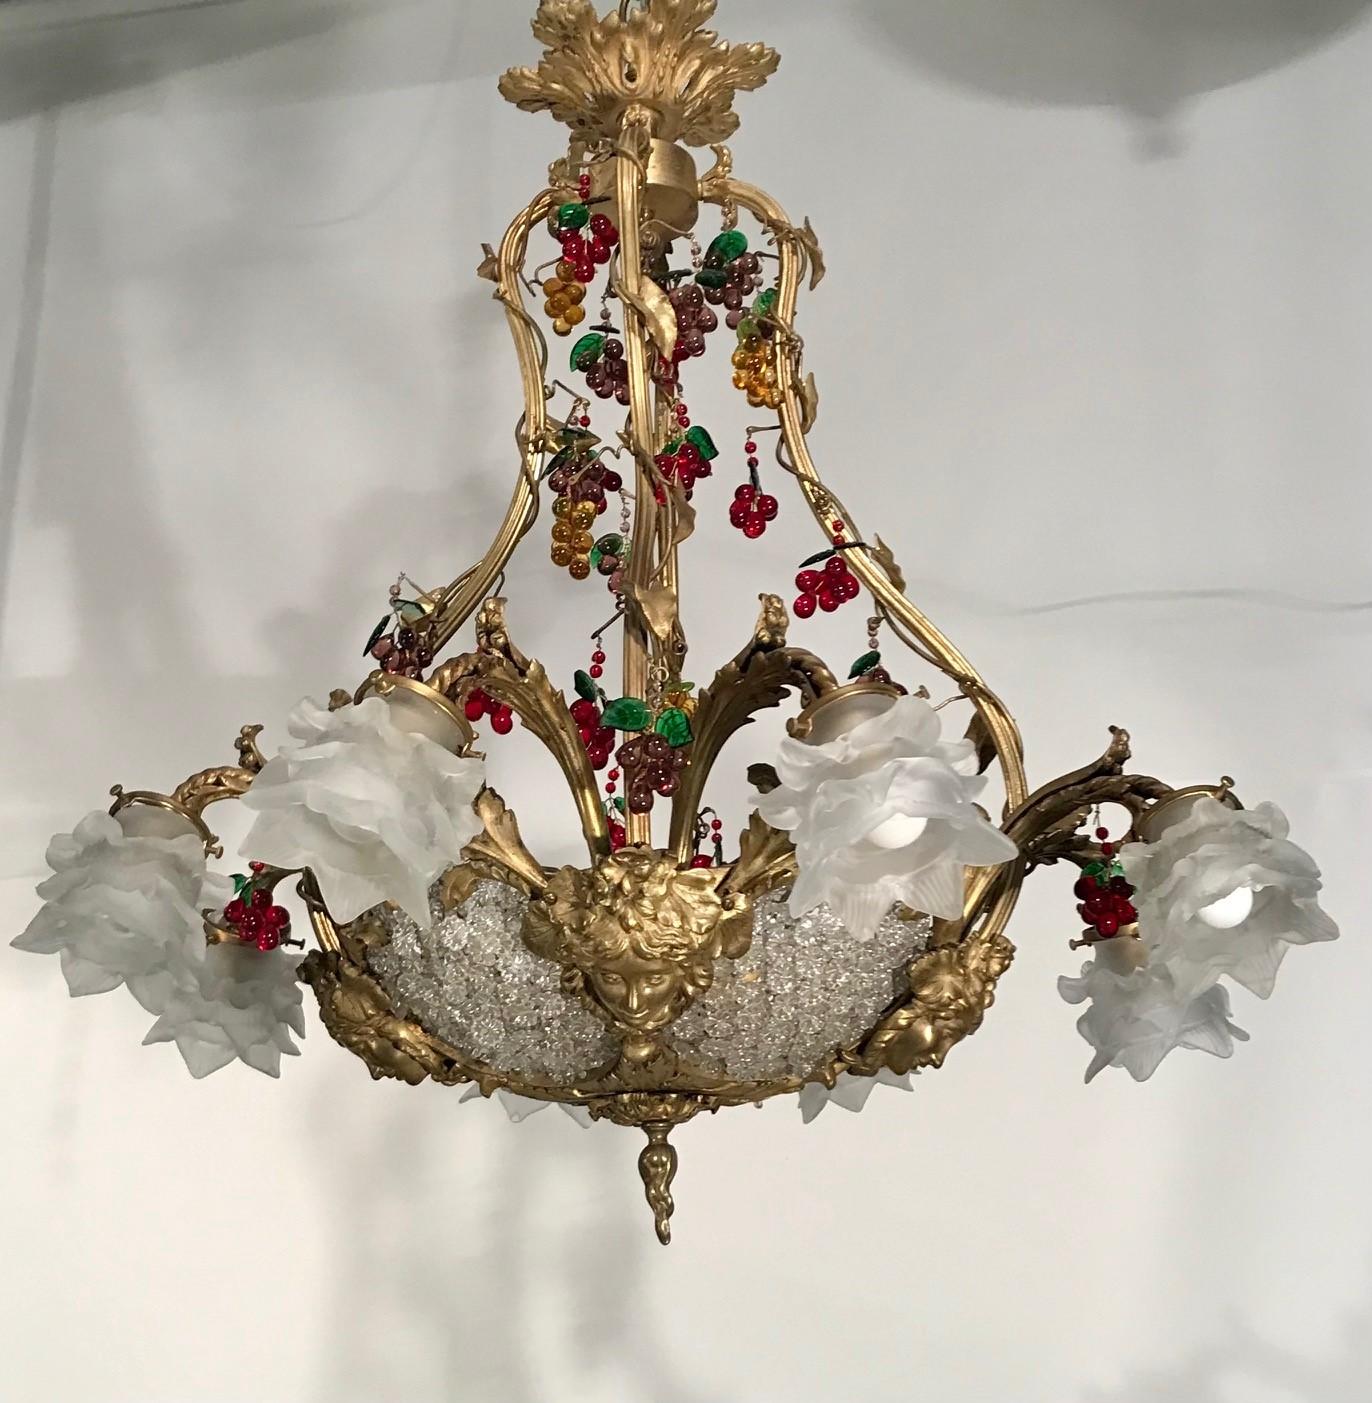 This chandelier has a heme-spherical “bag” formed as florets and eight down-swept lights with opaque flower-form shades interspersed with masques of the young Dionysis/Bacchus, so provides a lot of  potential candlepower. The vinous theme is further